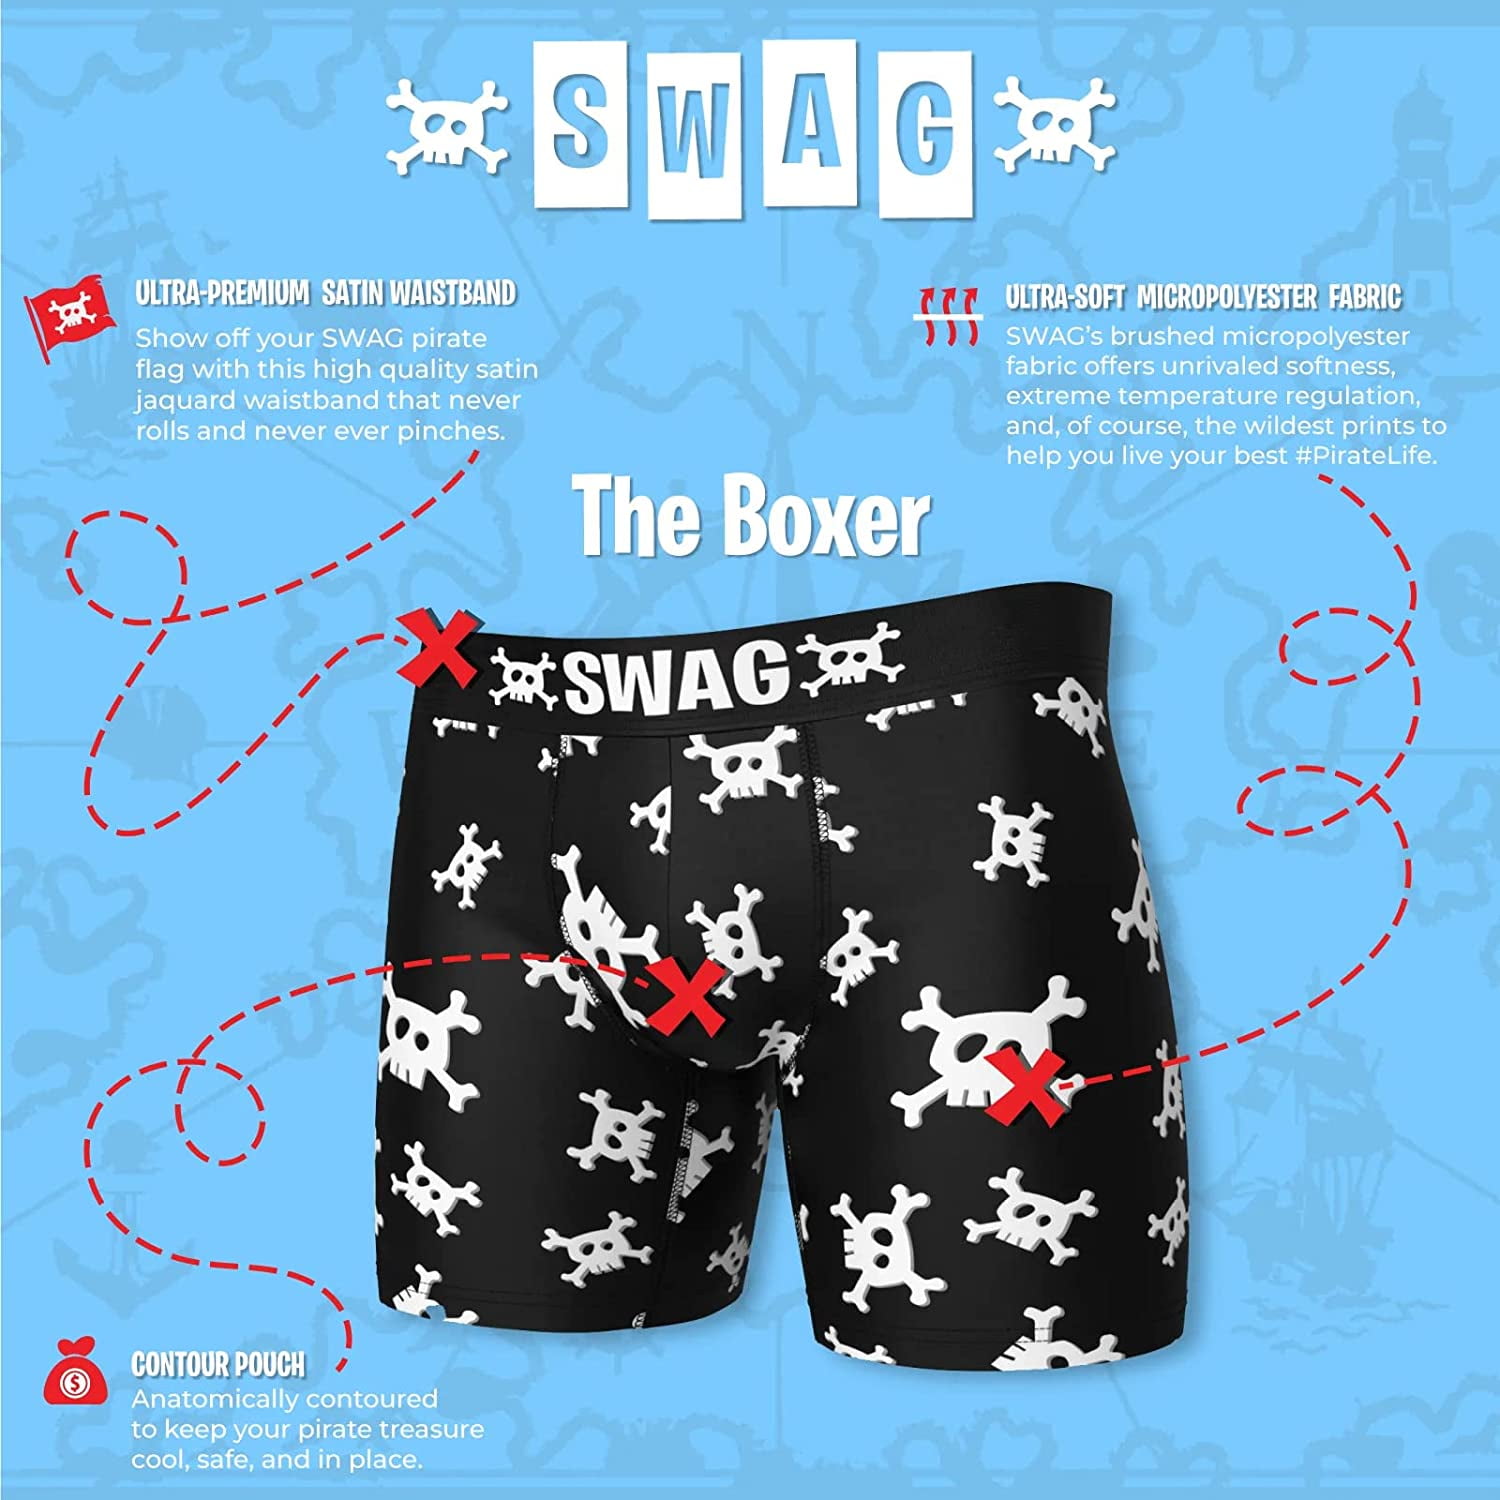 SWAG - The Simpsons - Homer Bush Boxers – SWAG Boxers